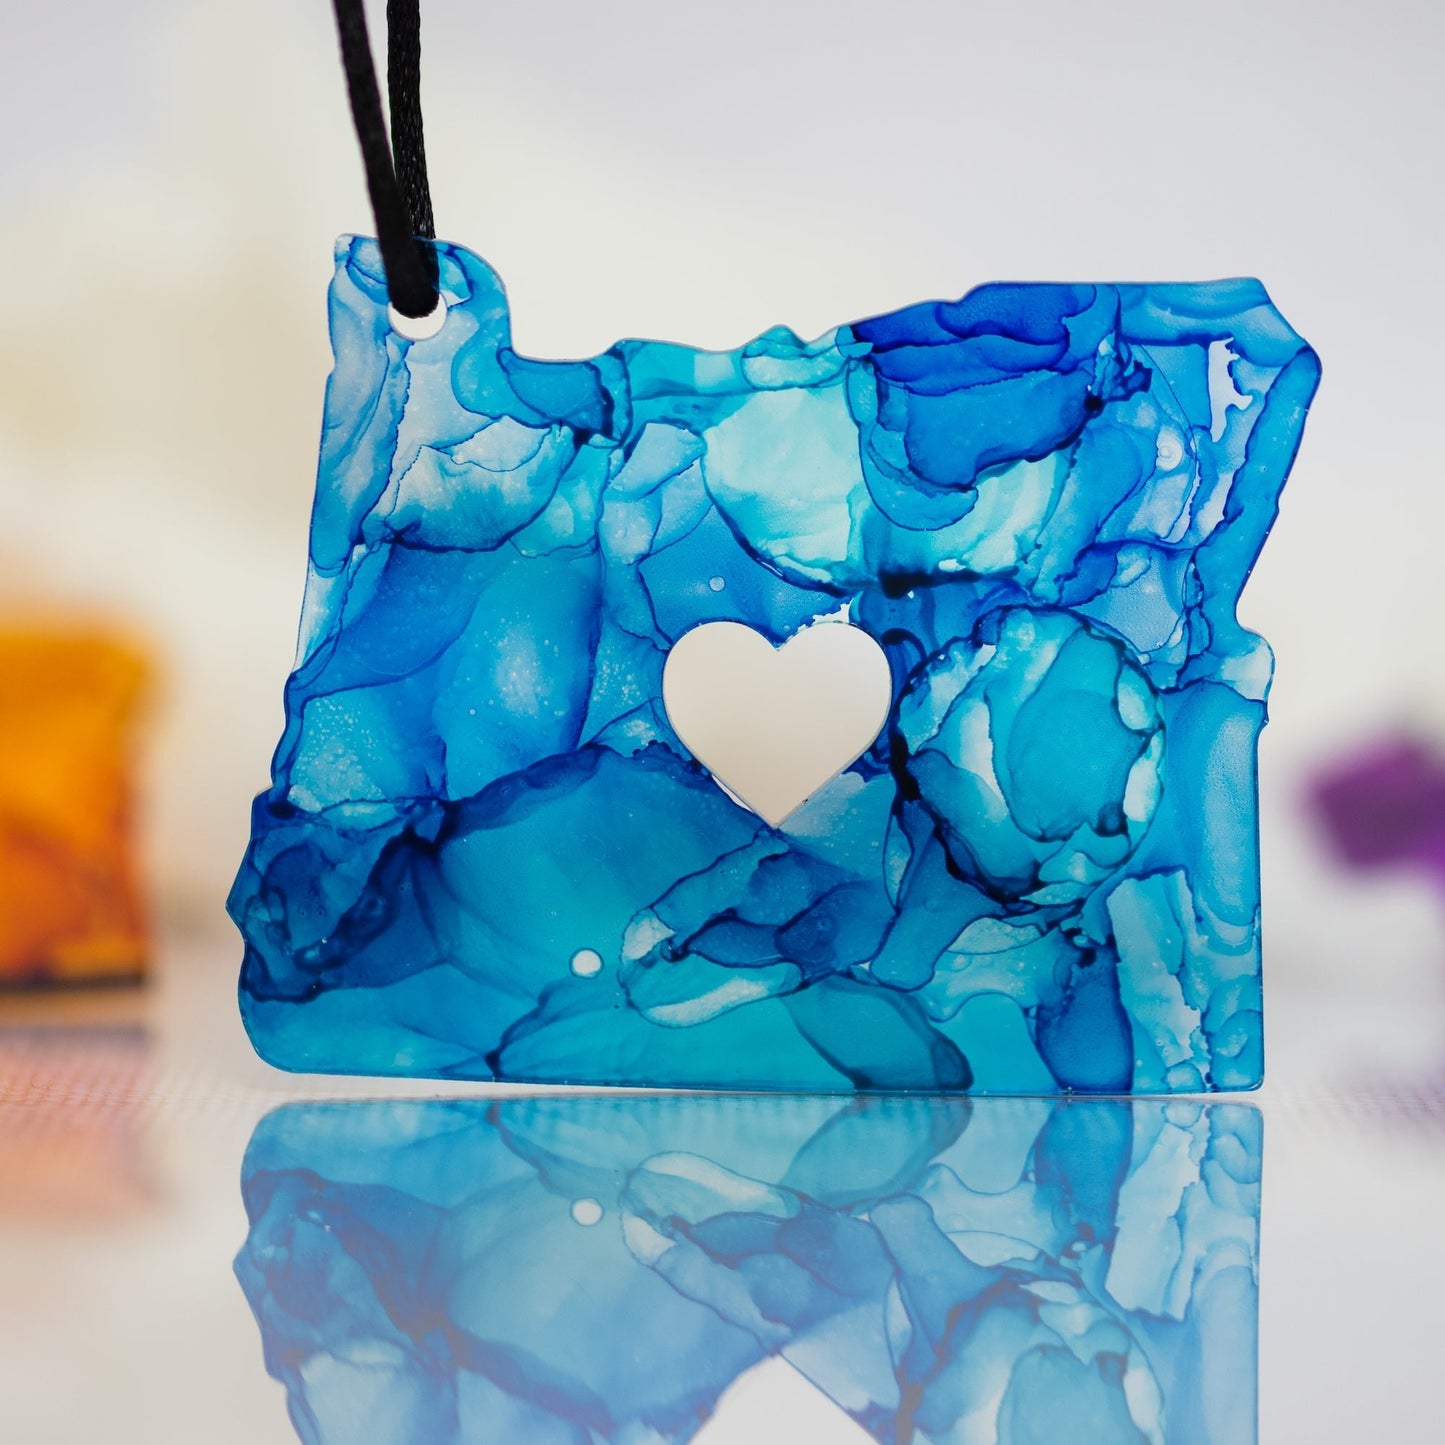 Alcohol Ink Oregon State Ornament in blue - A collaboration between West Meadow Creative and LeeMo Designs in Bend, Oregon